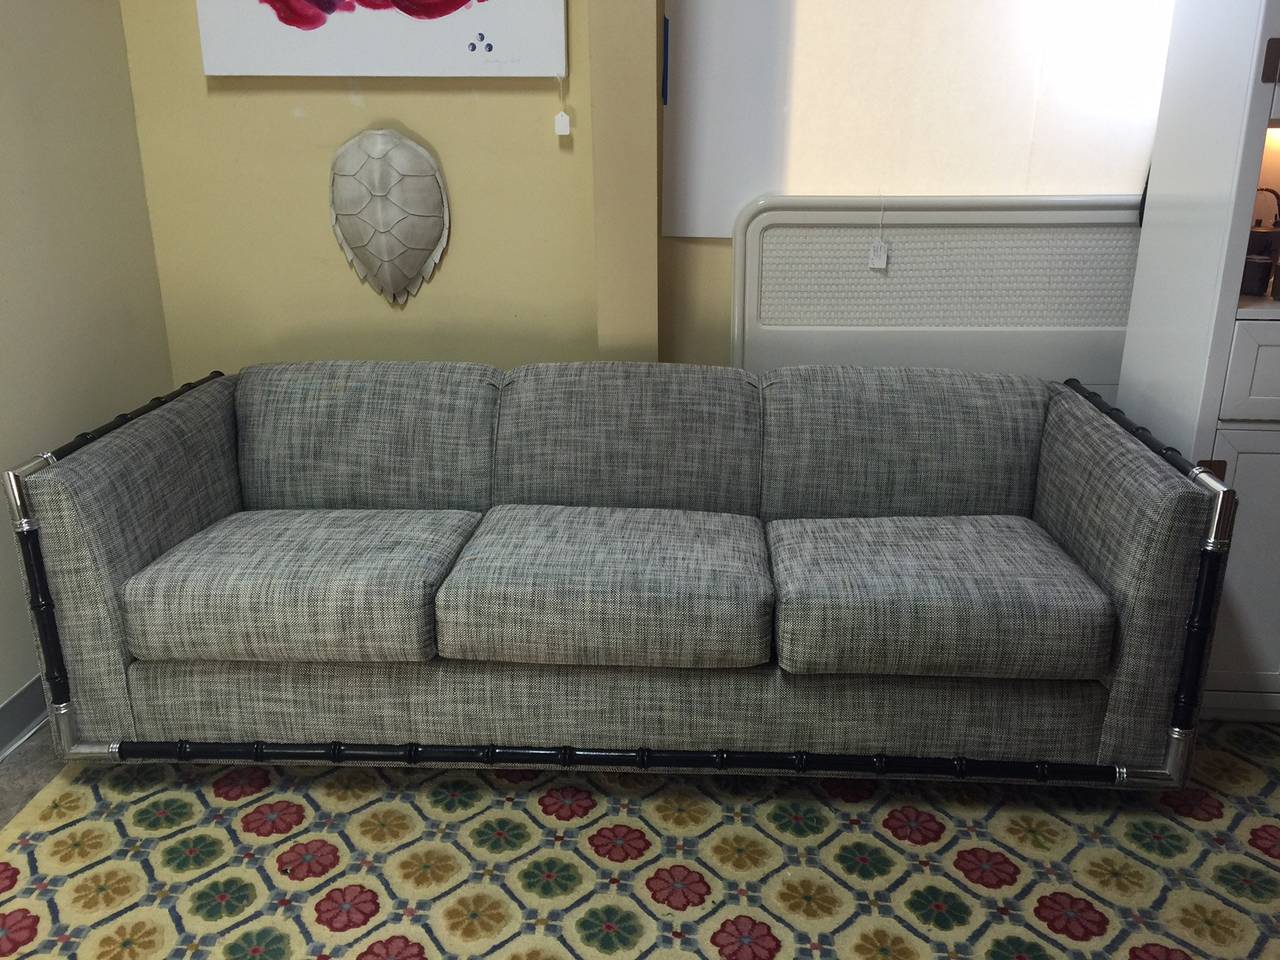 This sofa is a Classic example of MCM style and it has been completely refurbished: new springs, new cushions, new upholstery, and a new coat of paint on the fax bamboo trim. The chrome trim at the corners is in excellent condition. The fabric is a